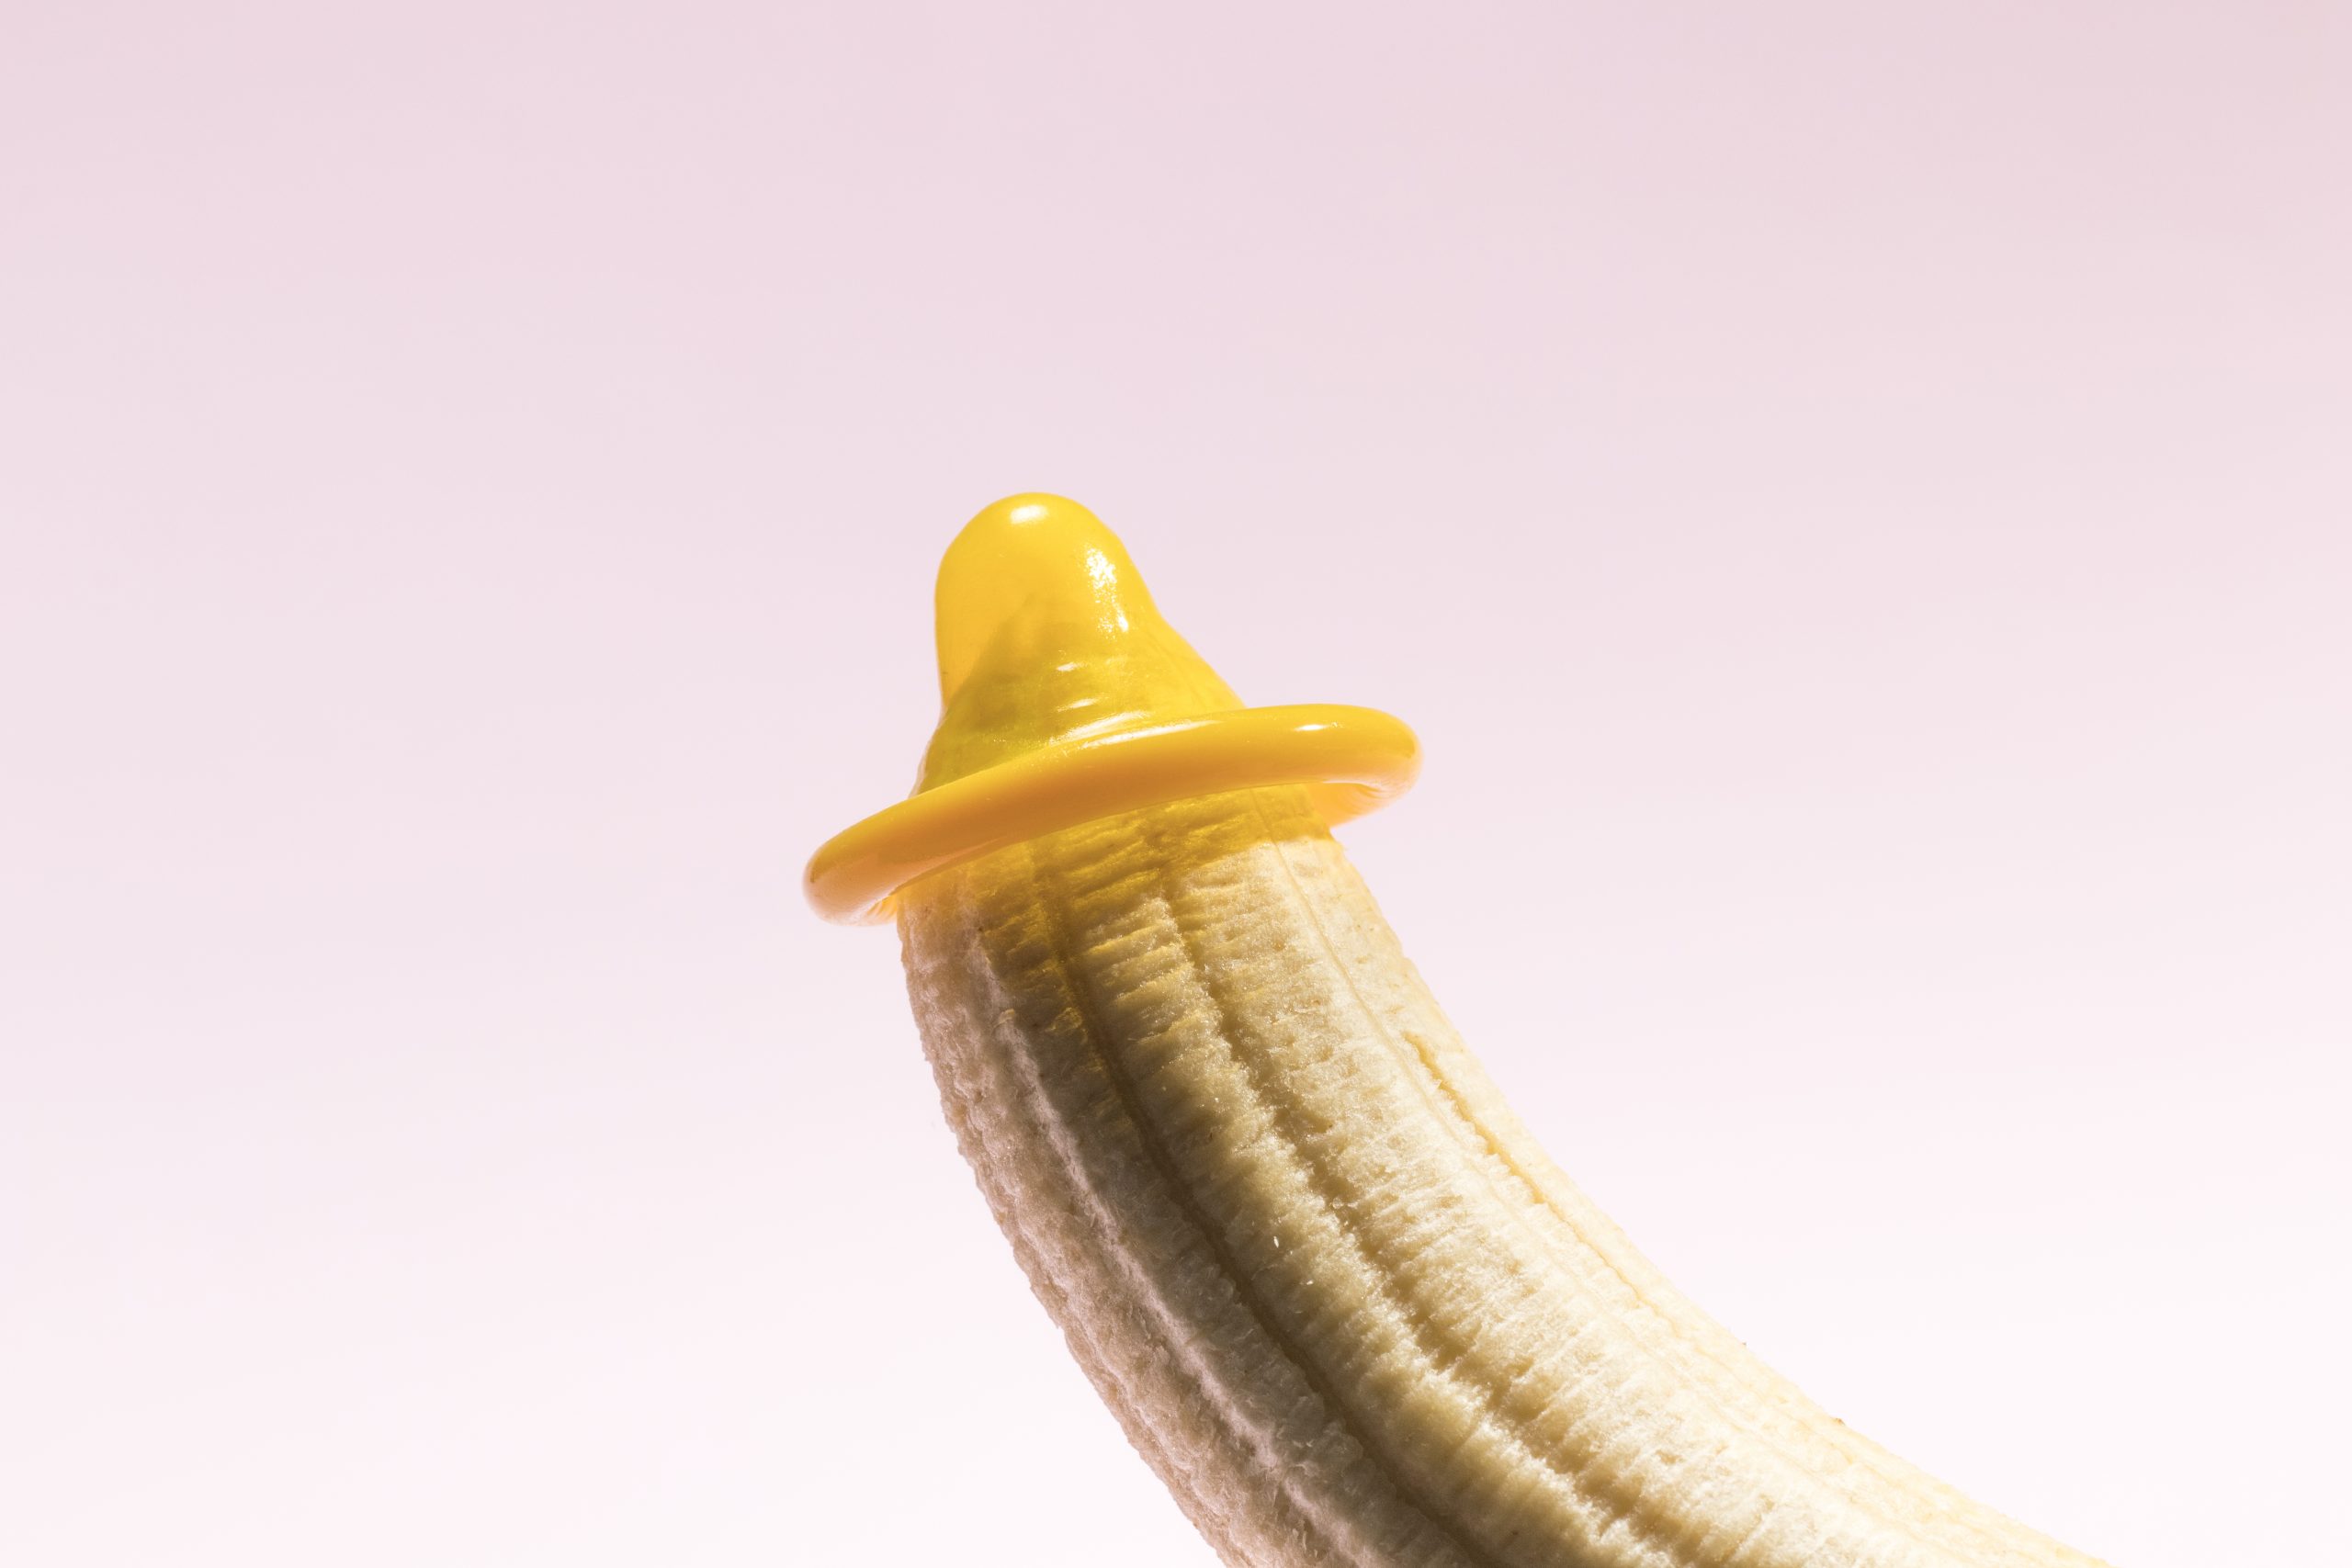 Condom Sizing: How to Choose the Right Condom Size